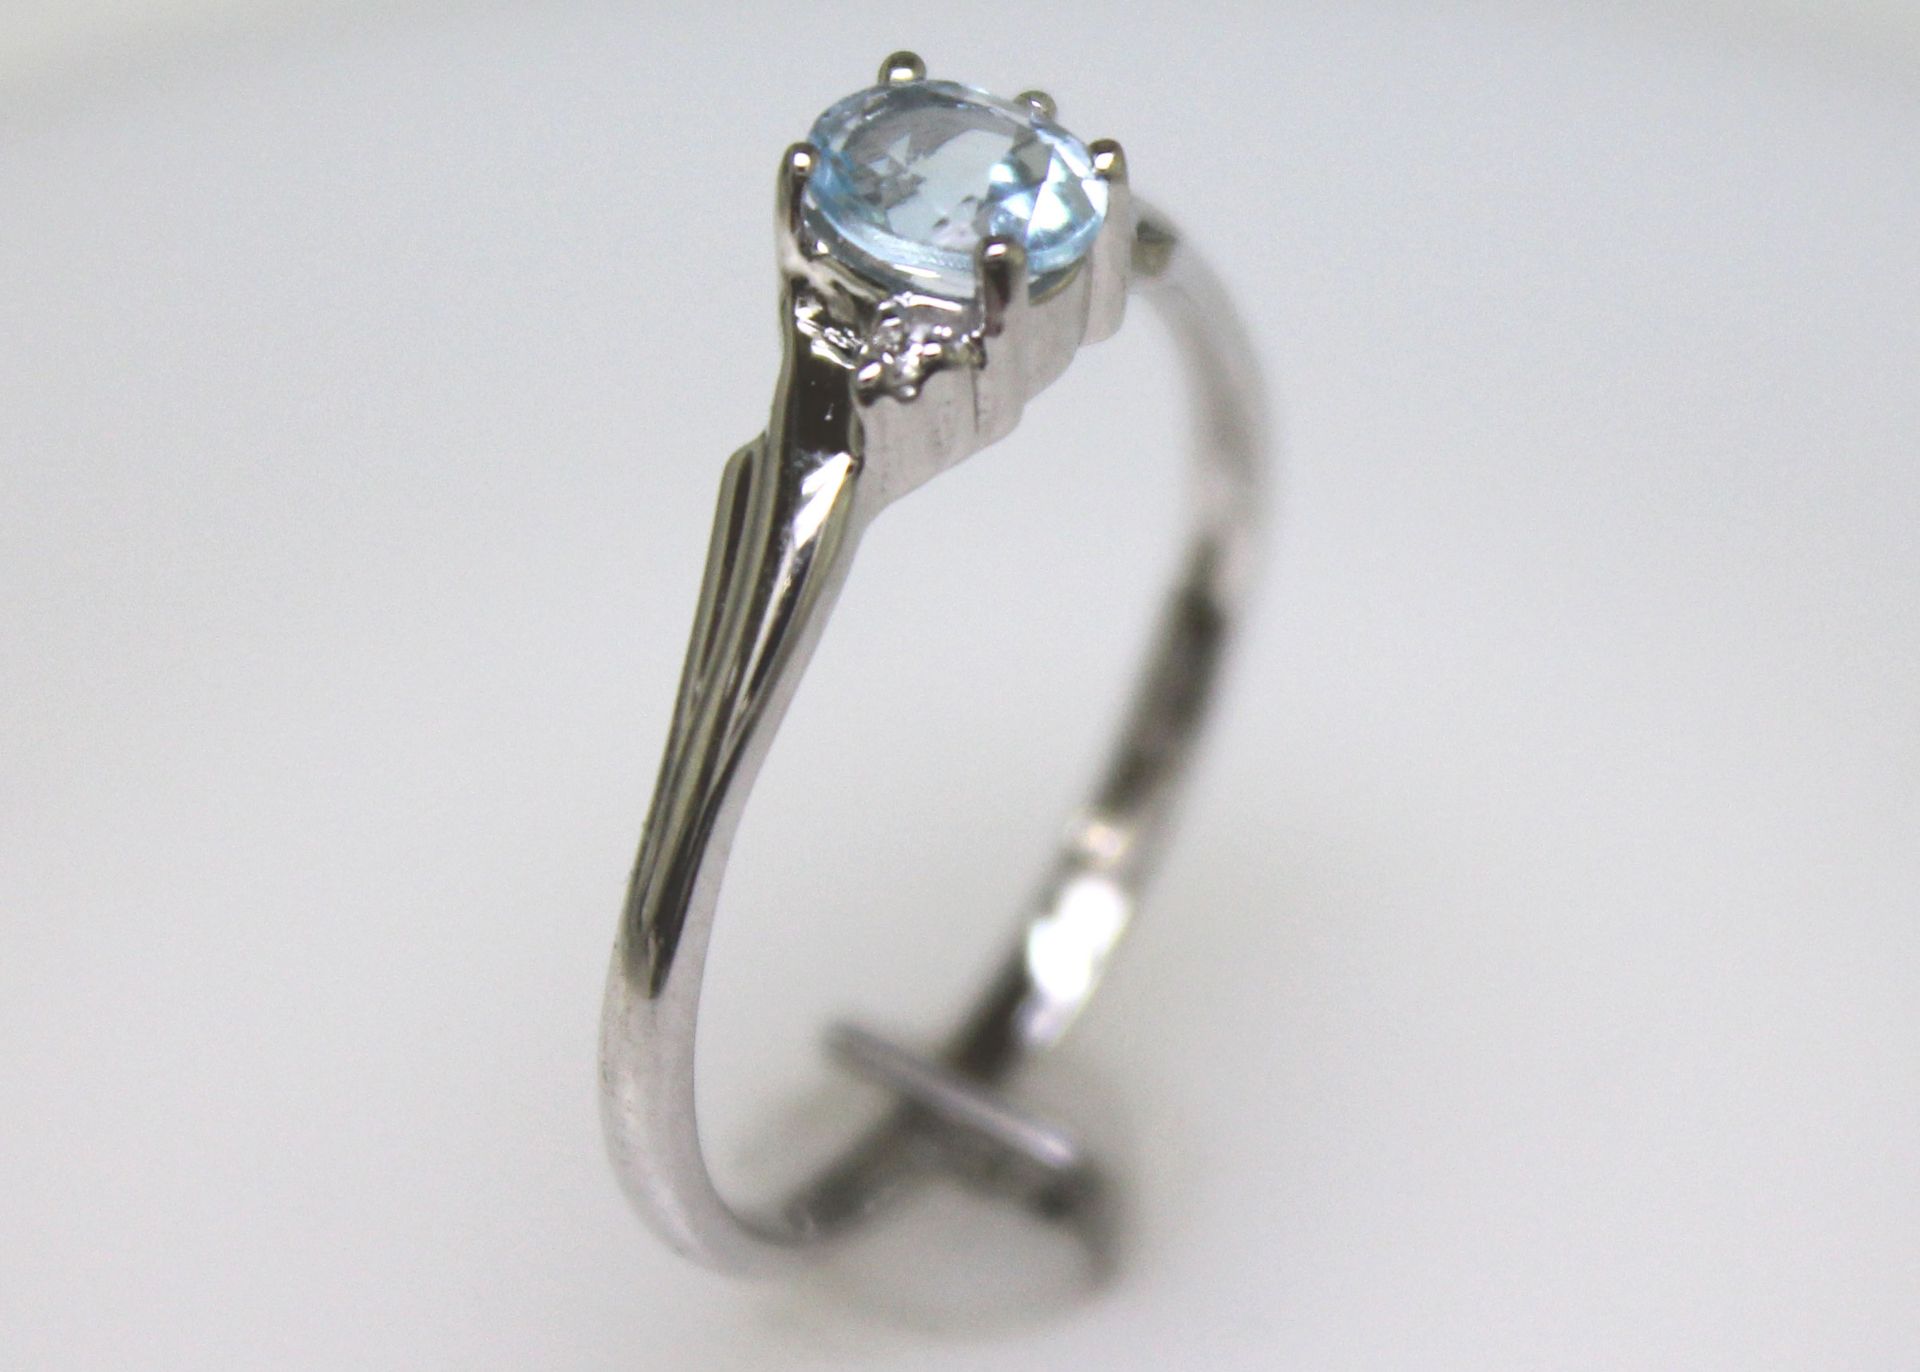 9ct White Gold Diamond and Blue Topaz Ring 0.01 Carats - Valued by GIE £755.00 - This ring - Image 6 of 9